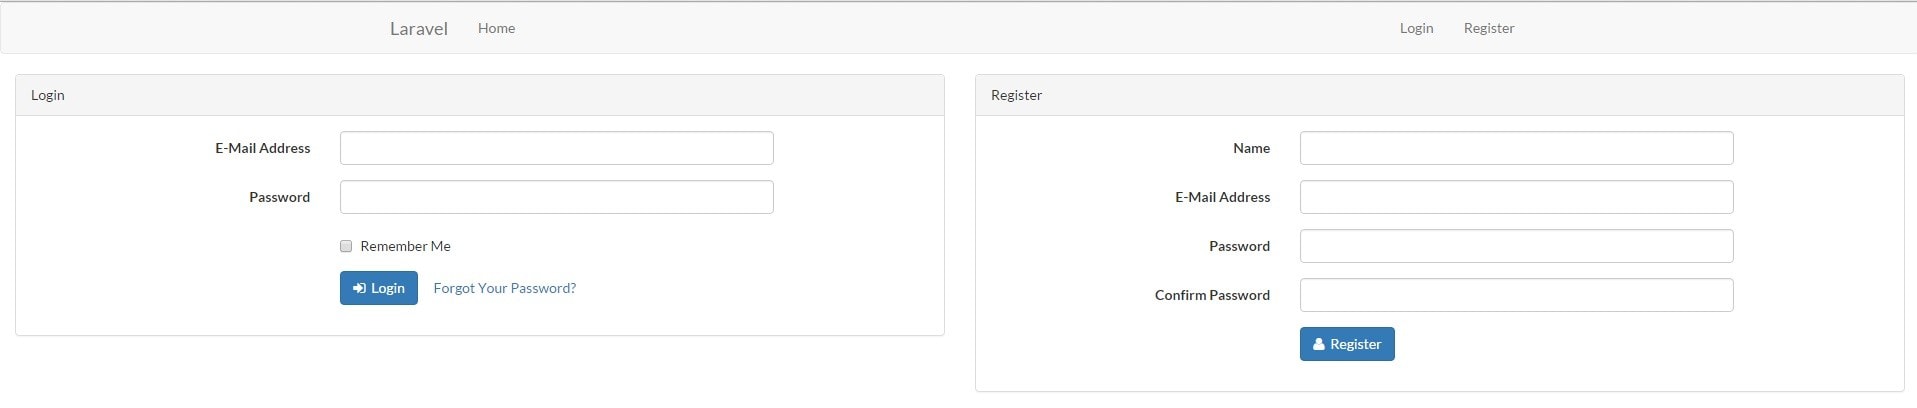 Simple and Easy Laravel 5.2 Login and Register using the auth scaffold